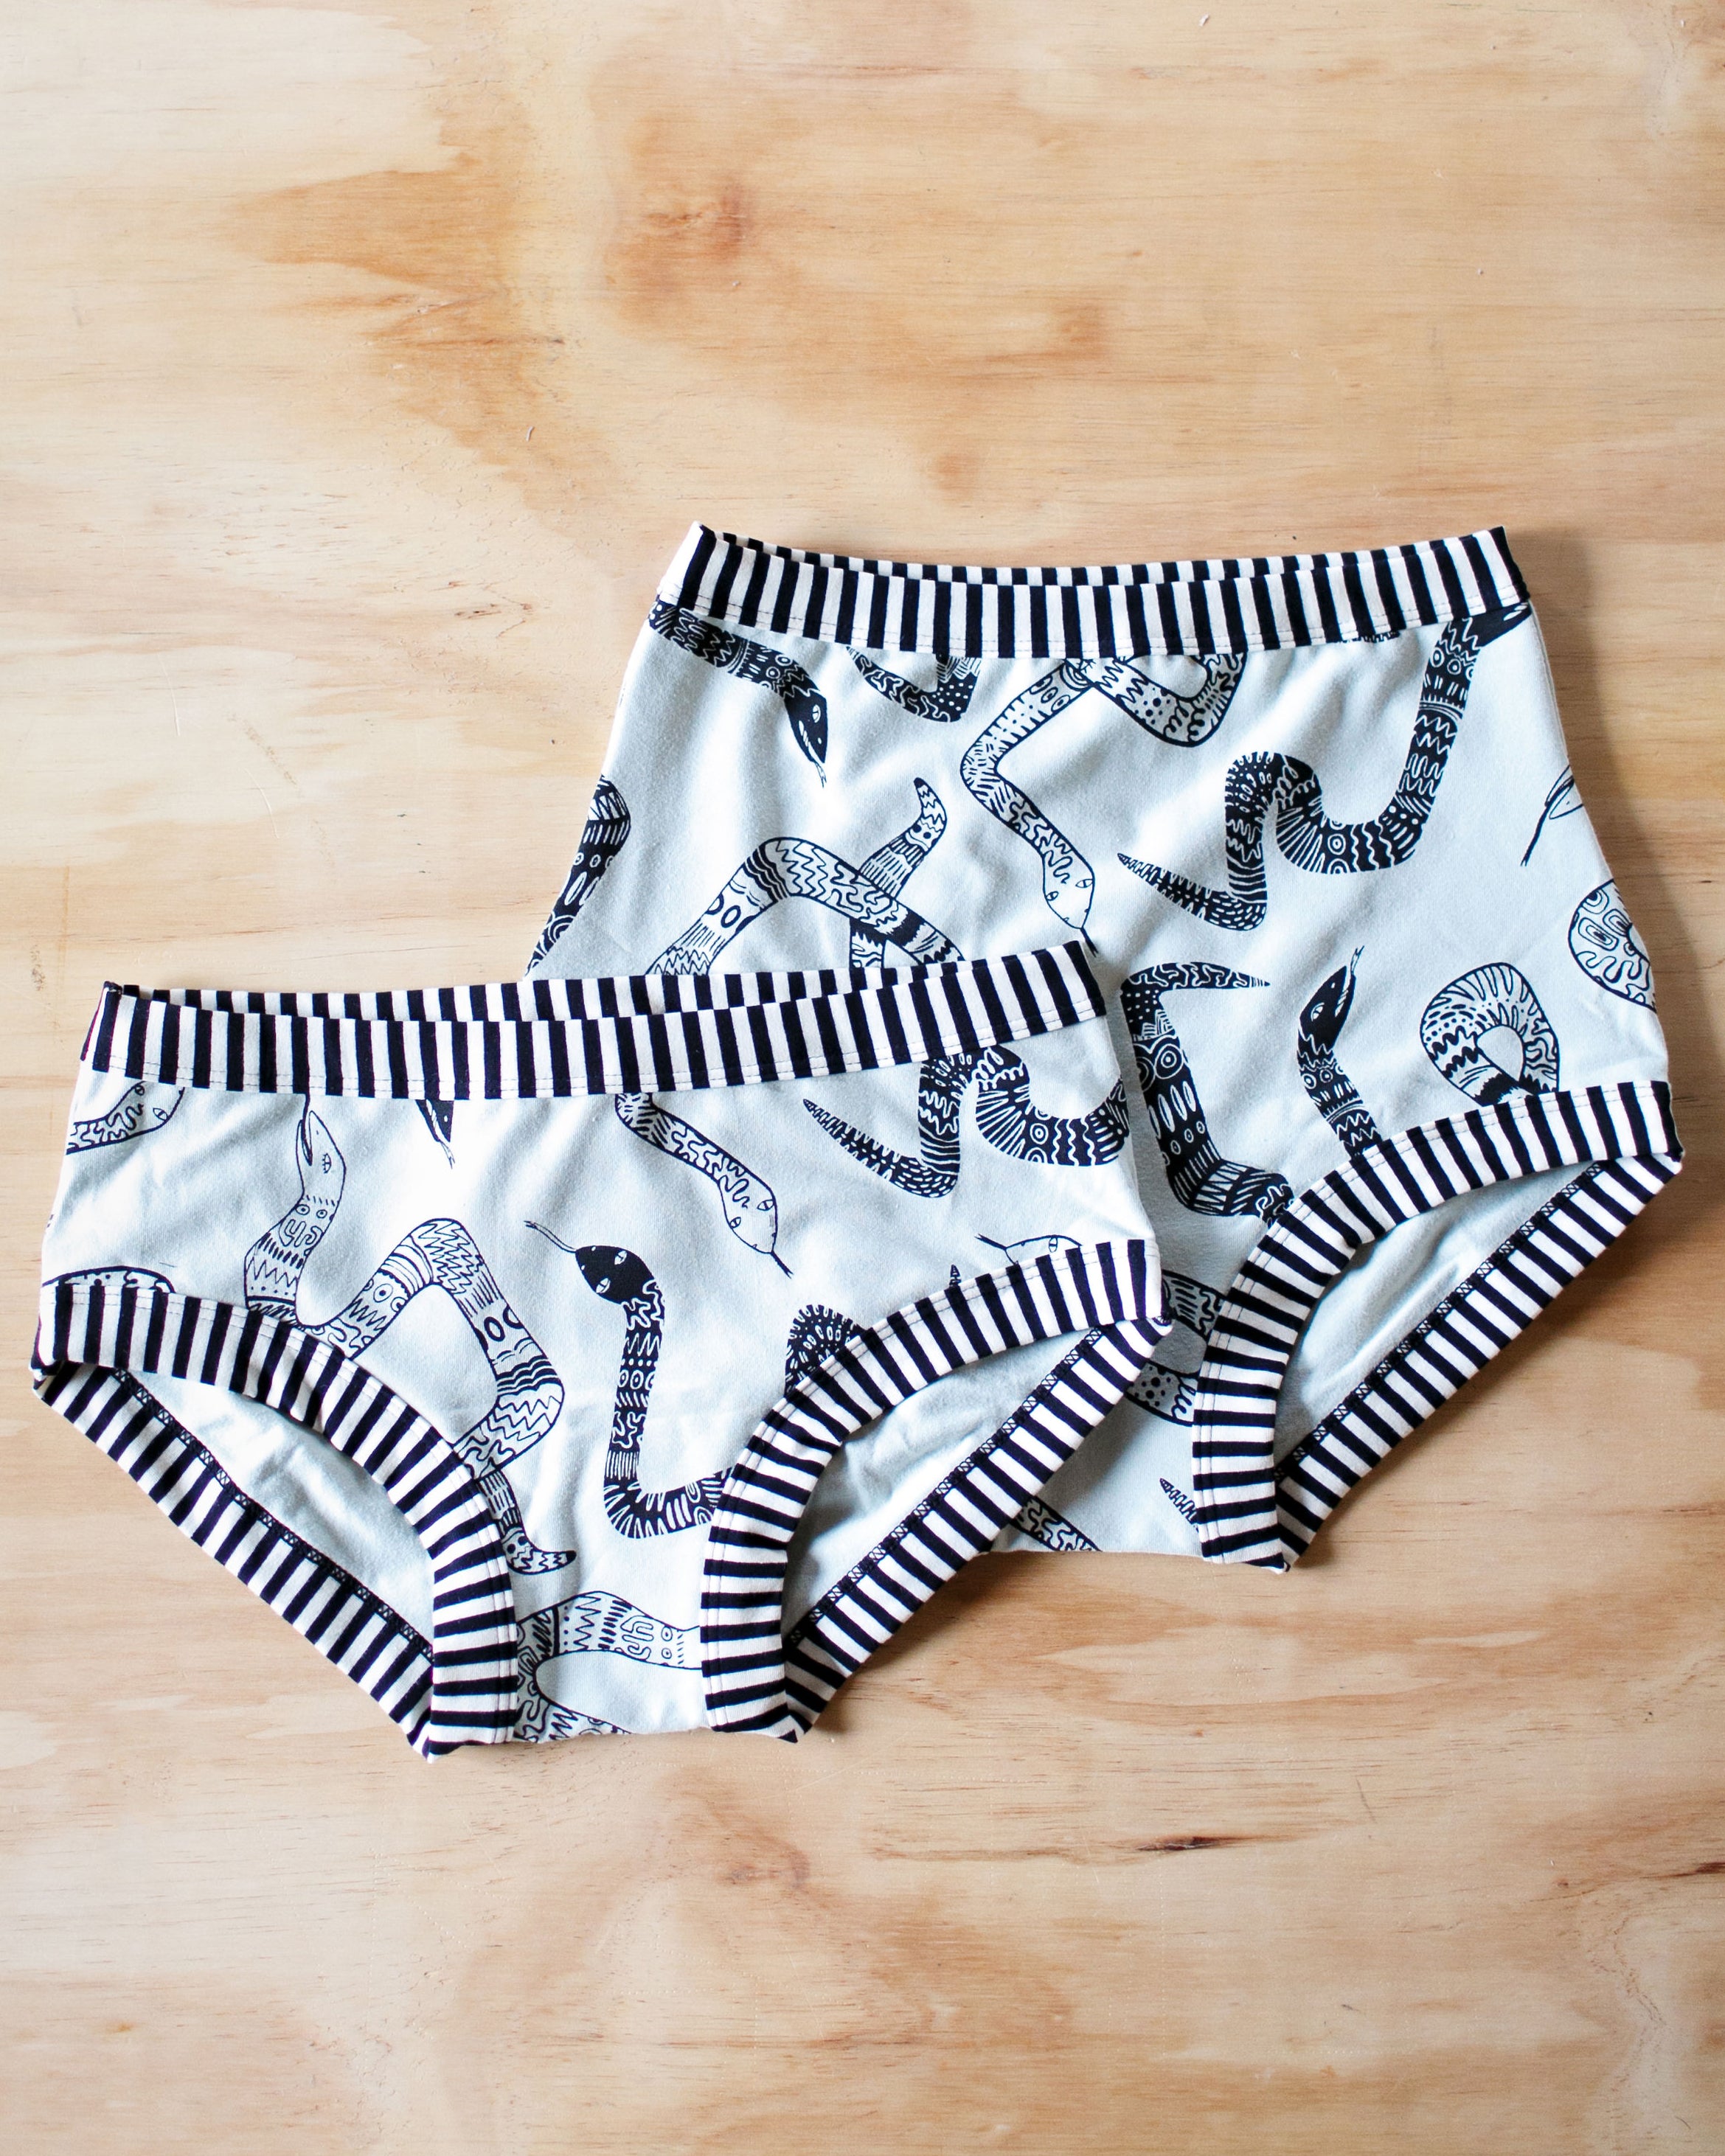 Flat lay of Thunderpants organic cotton Hipster style underwear and Sky Rise style underwear in Sketchy Snakes: sage color with black sketched snakes and black and white stripe binding.